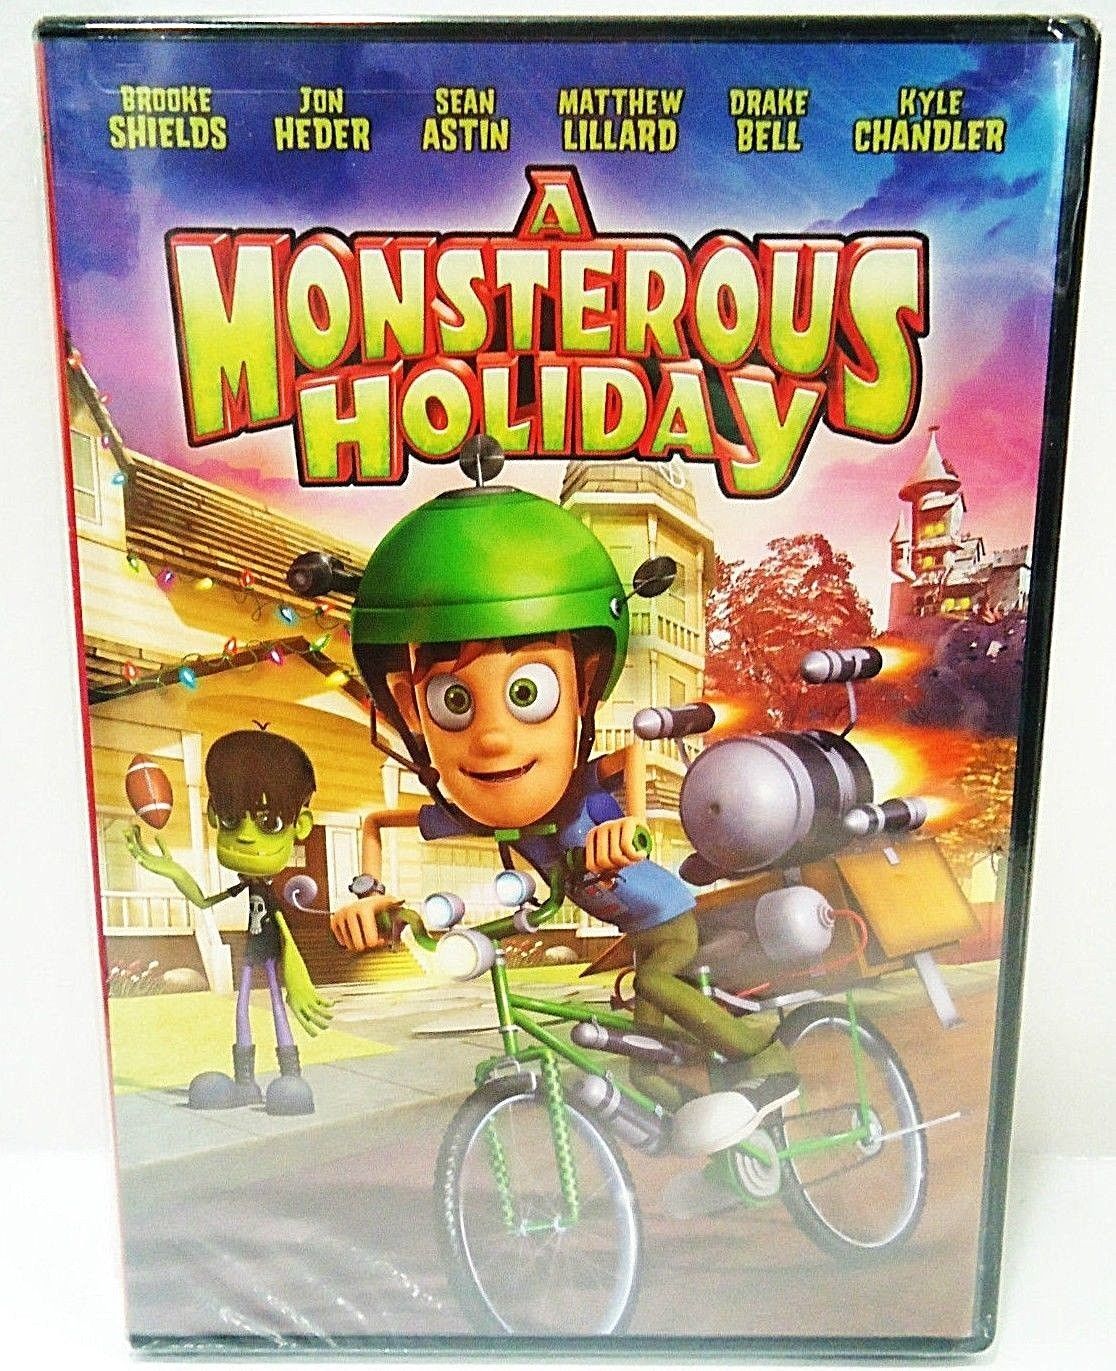 A Monsterous Holiday - Dvd - Brooke Shields and 50 similar items